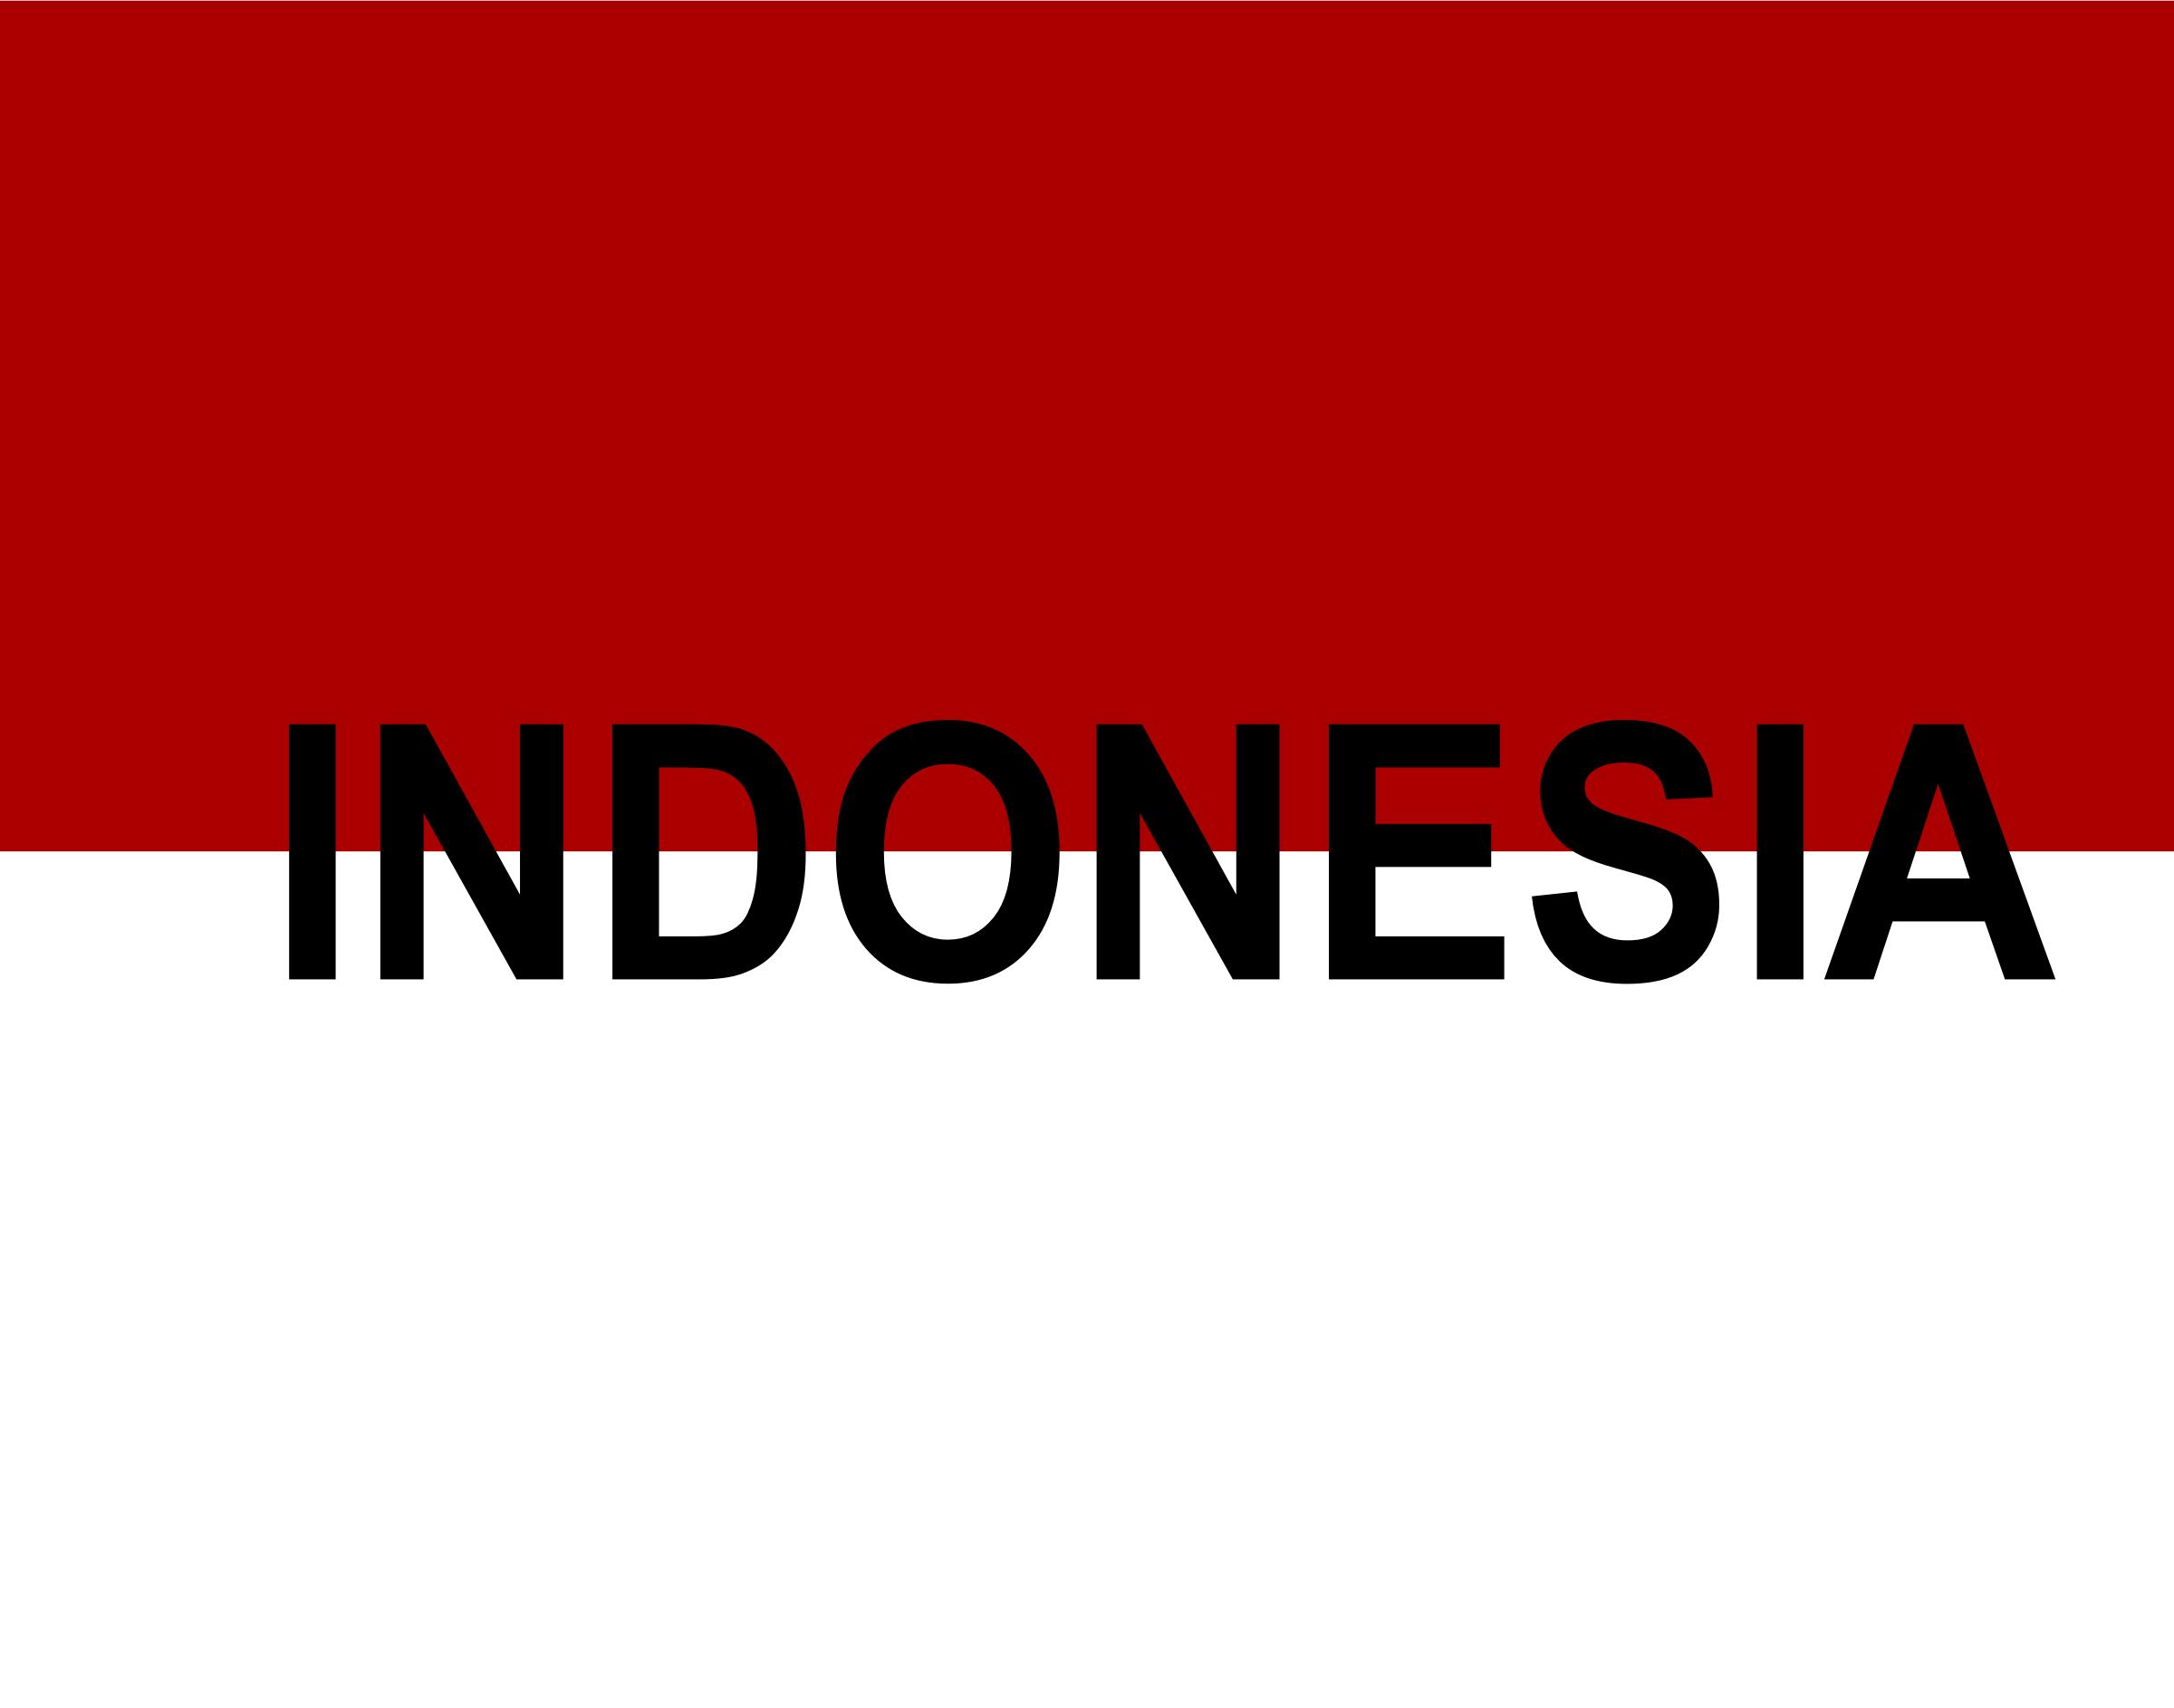 Indonesian flag text png